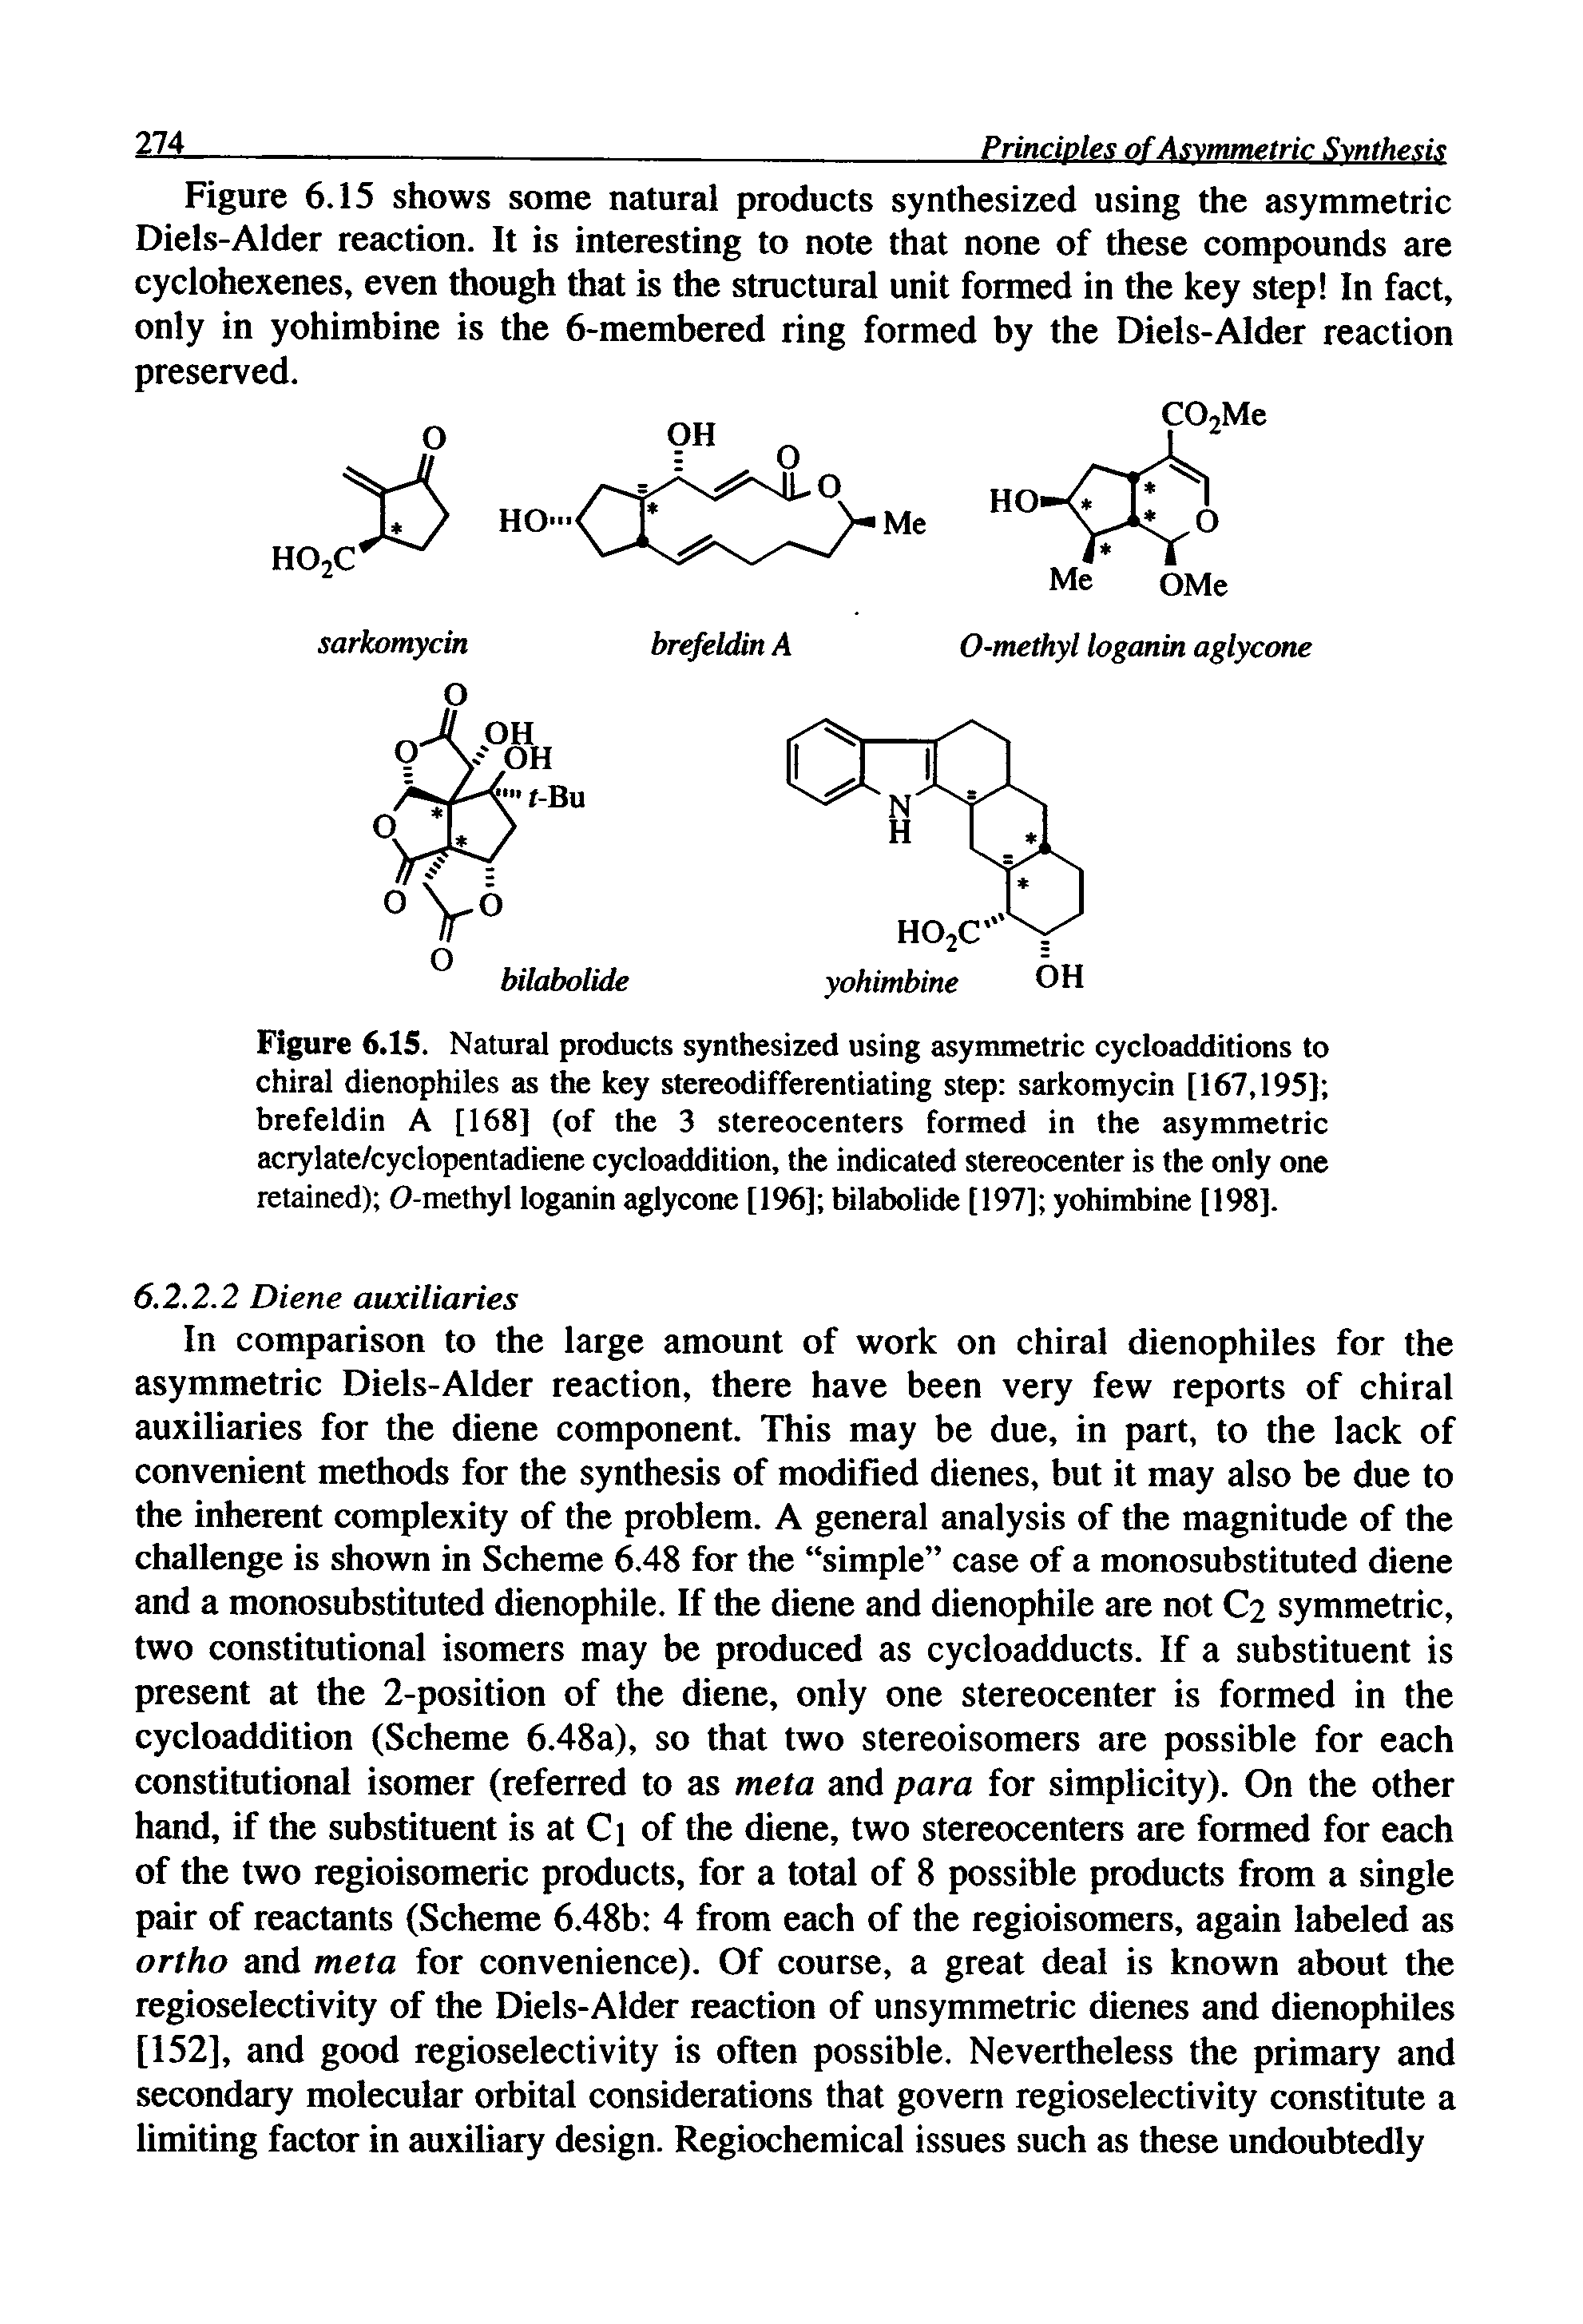 Figure 6.15. Natural products synthesized using asymmetric cycloadditions to chiral dienophiles as the key stereodifferentiating step sarkomycin [167,195] brefeldin A [168] (of the 3 stereocenters formed in the asymmetric acrylate/cyclopentadiene cycloaddition, the indicated stereocenter is the only one retained) 0-methyl loganin aglycone [196] bilabolide [197] yohimbine [198].